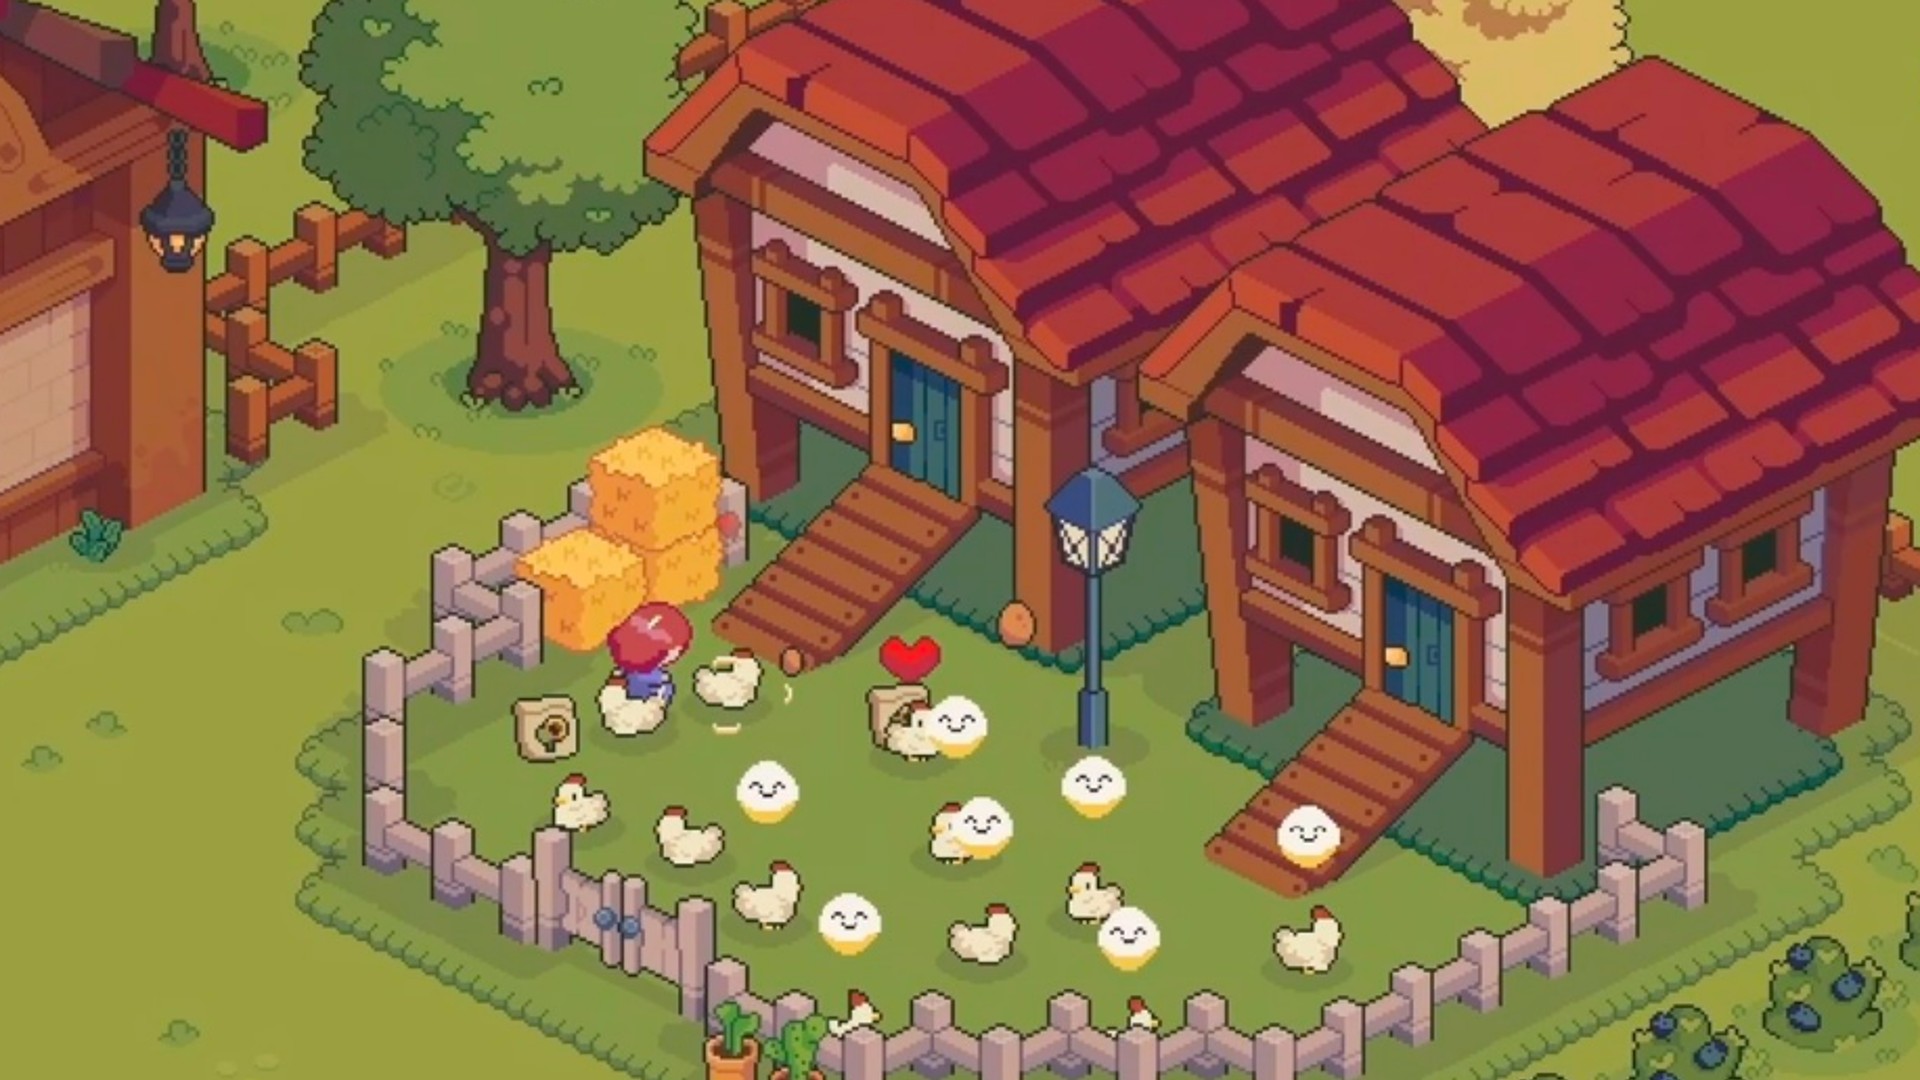 This adorable farming sim might just be the ultimate Stardew Valley dupe